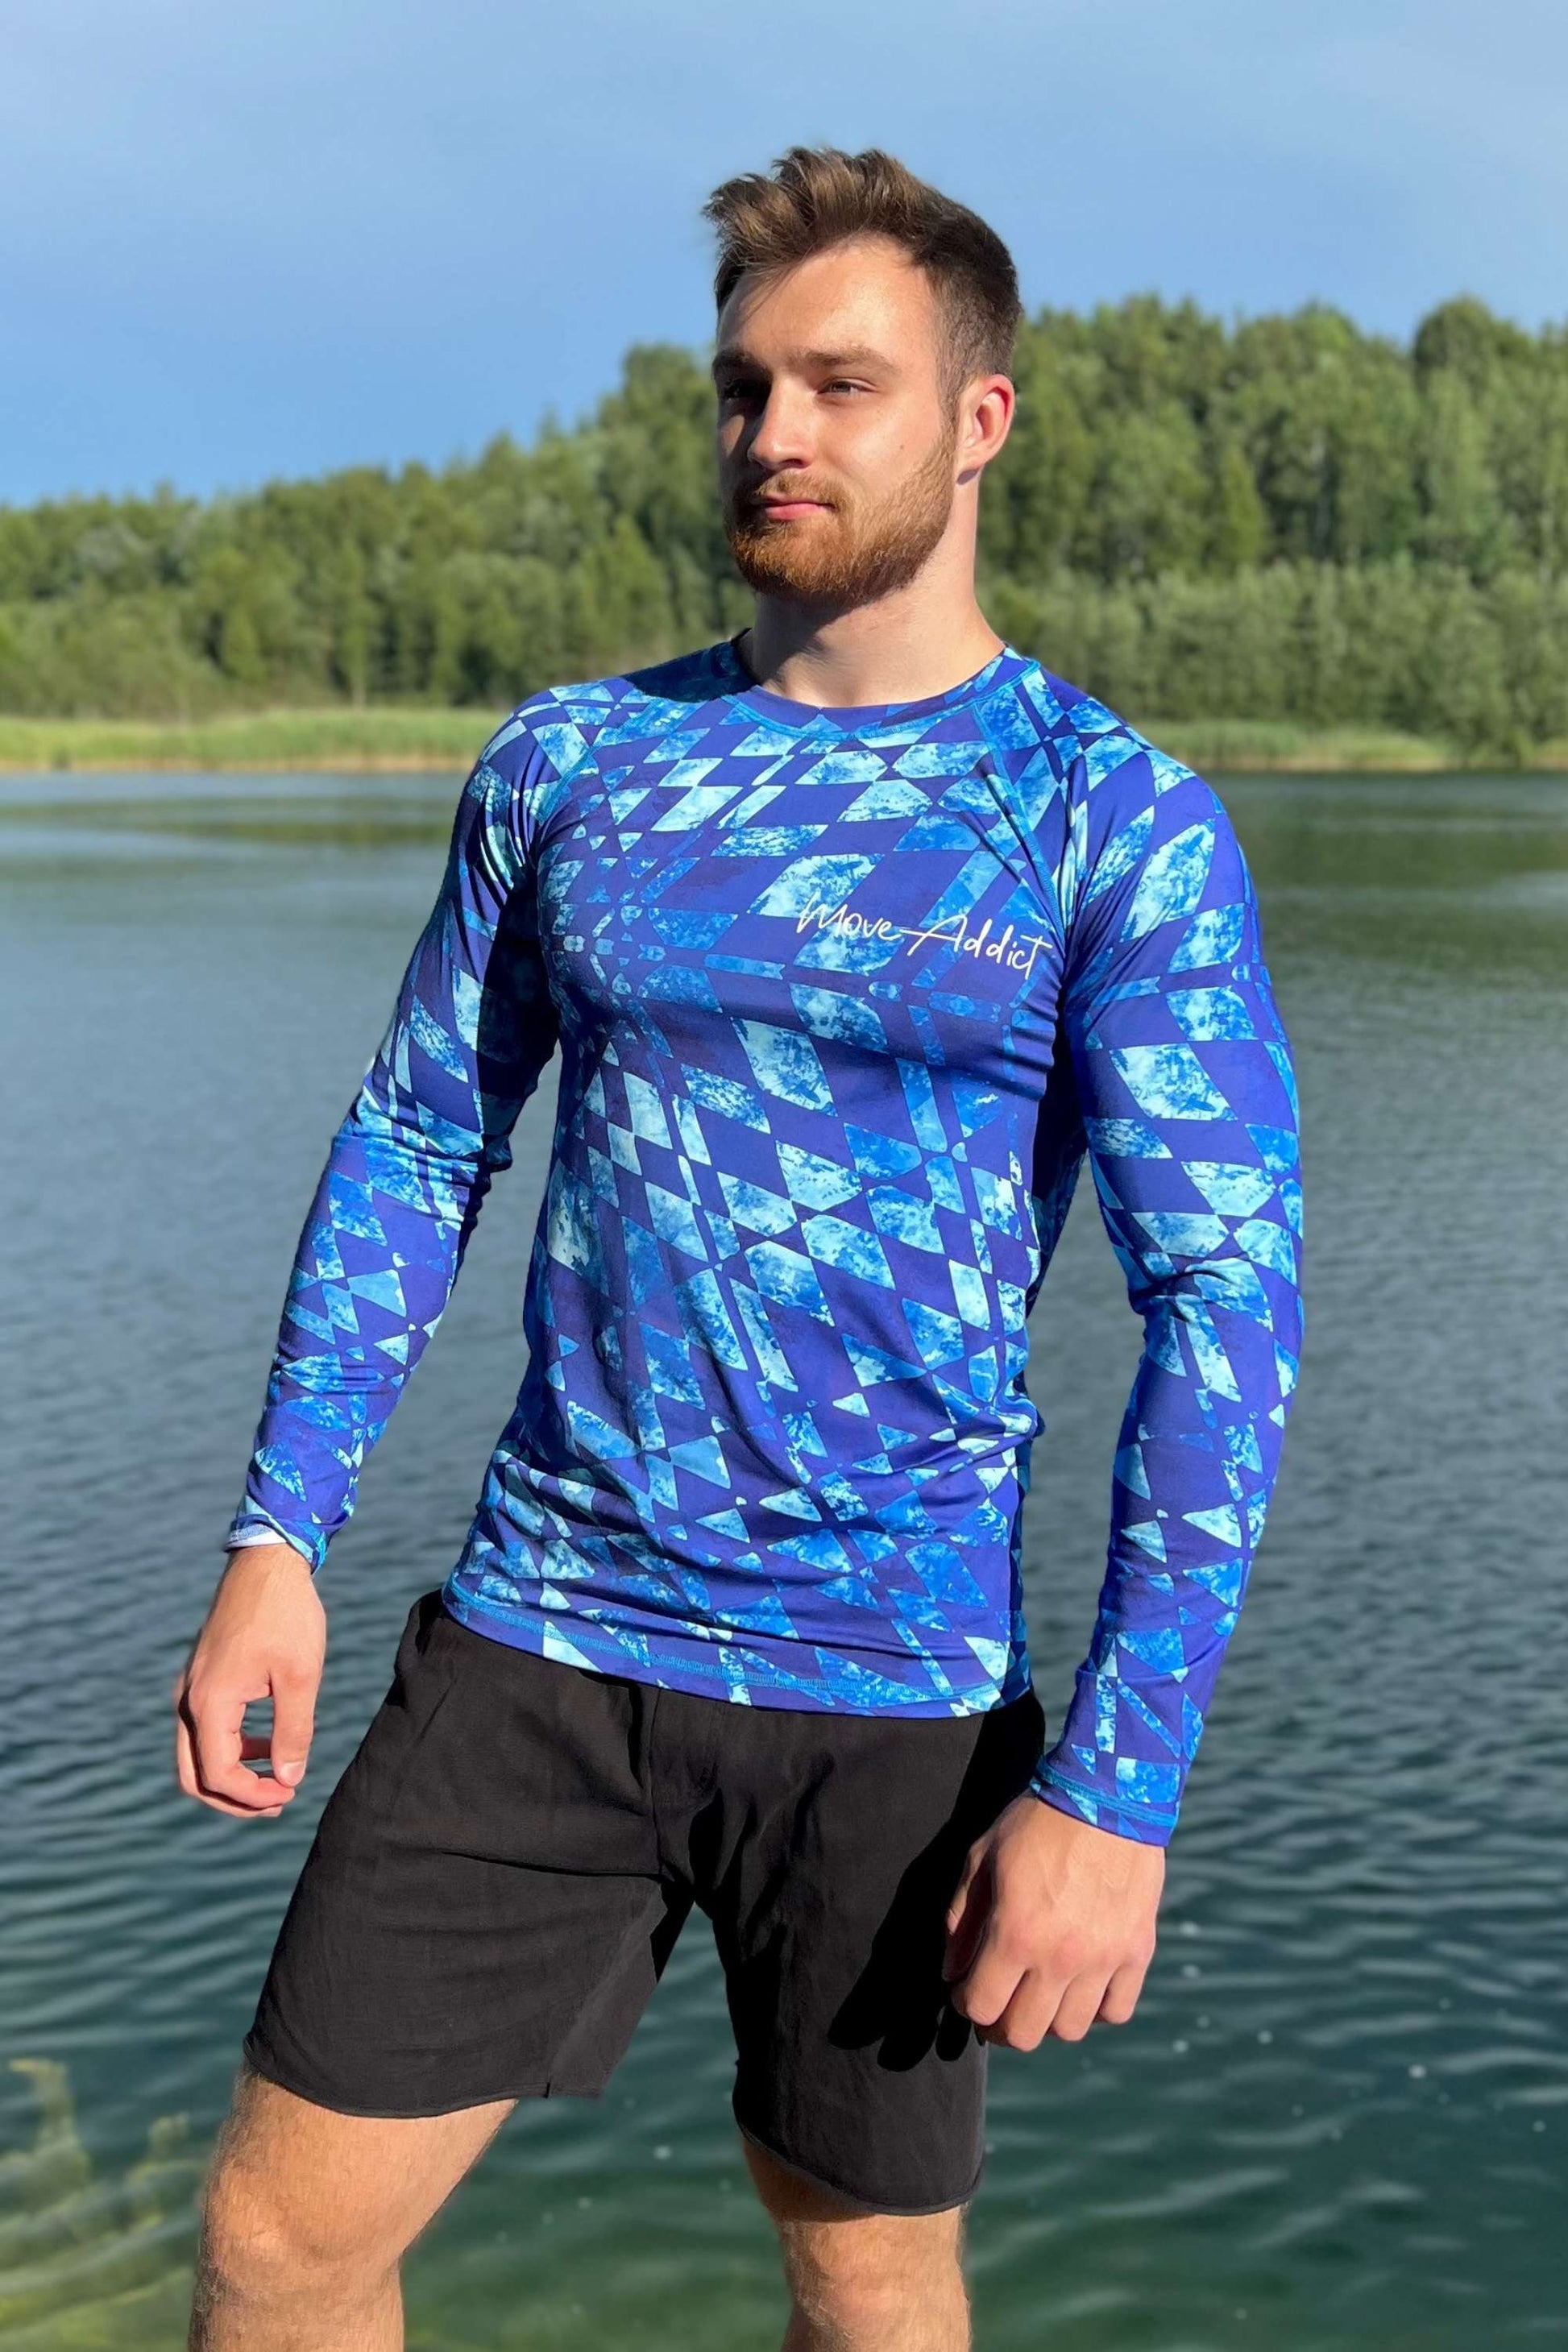 Men's Quick-Drying Lycra for Water Sports| Long Sleeve Men's Lycra| Summer water sports outfit| Active lifestyle| Sun and wind protection